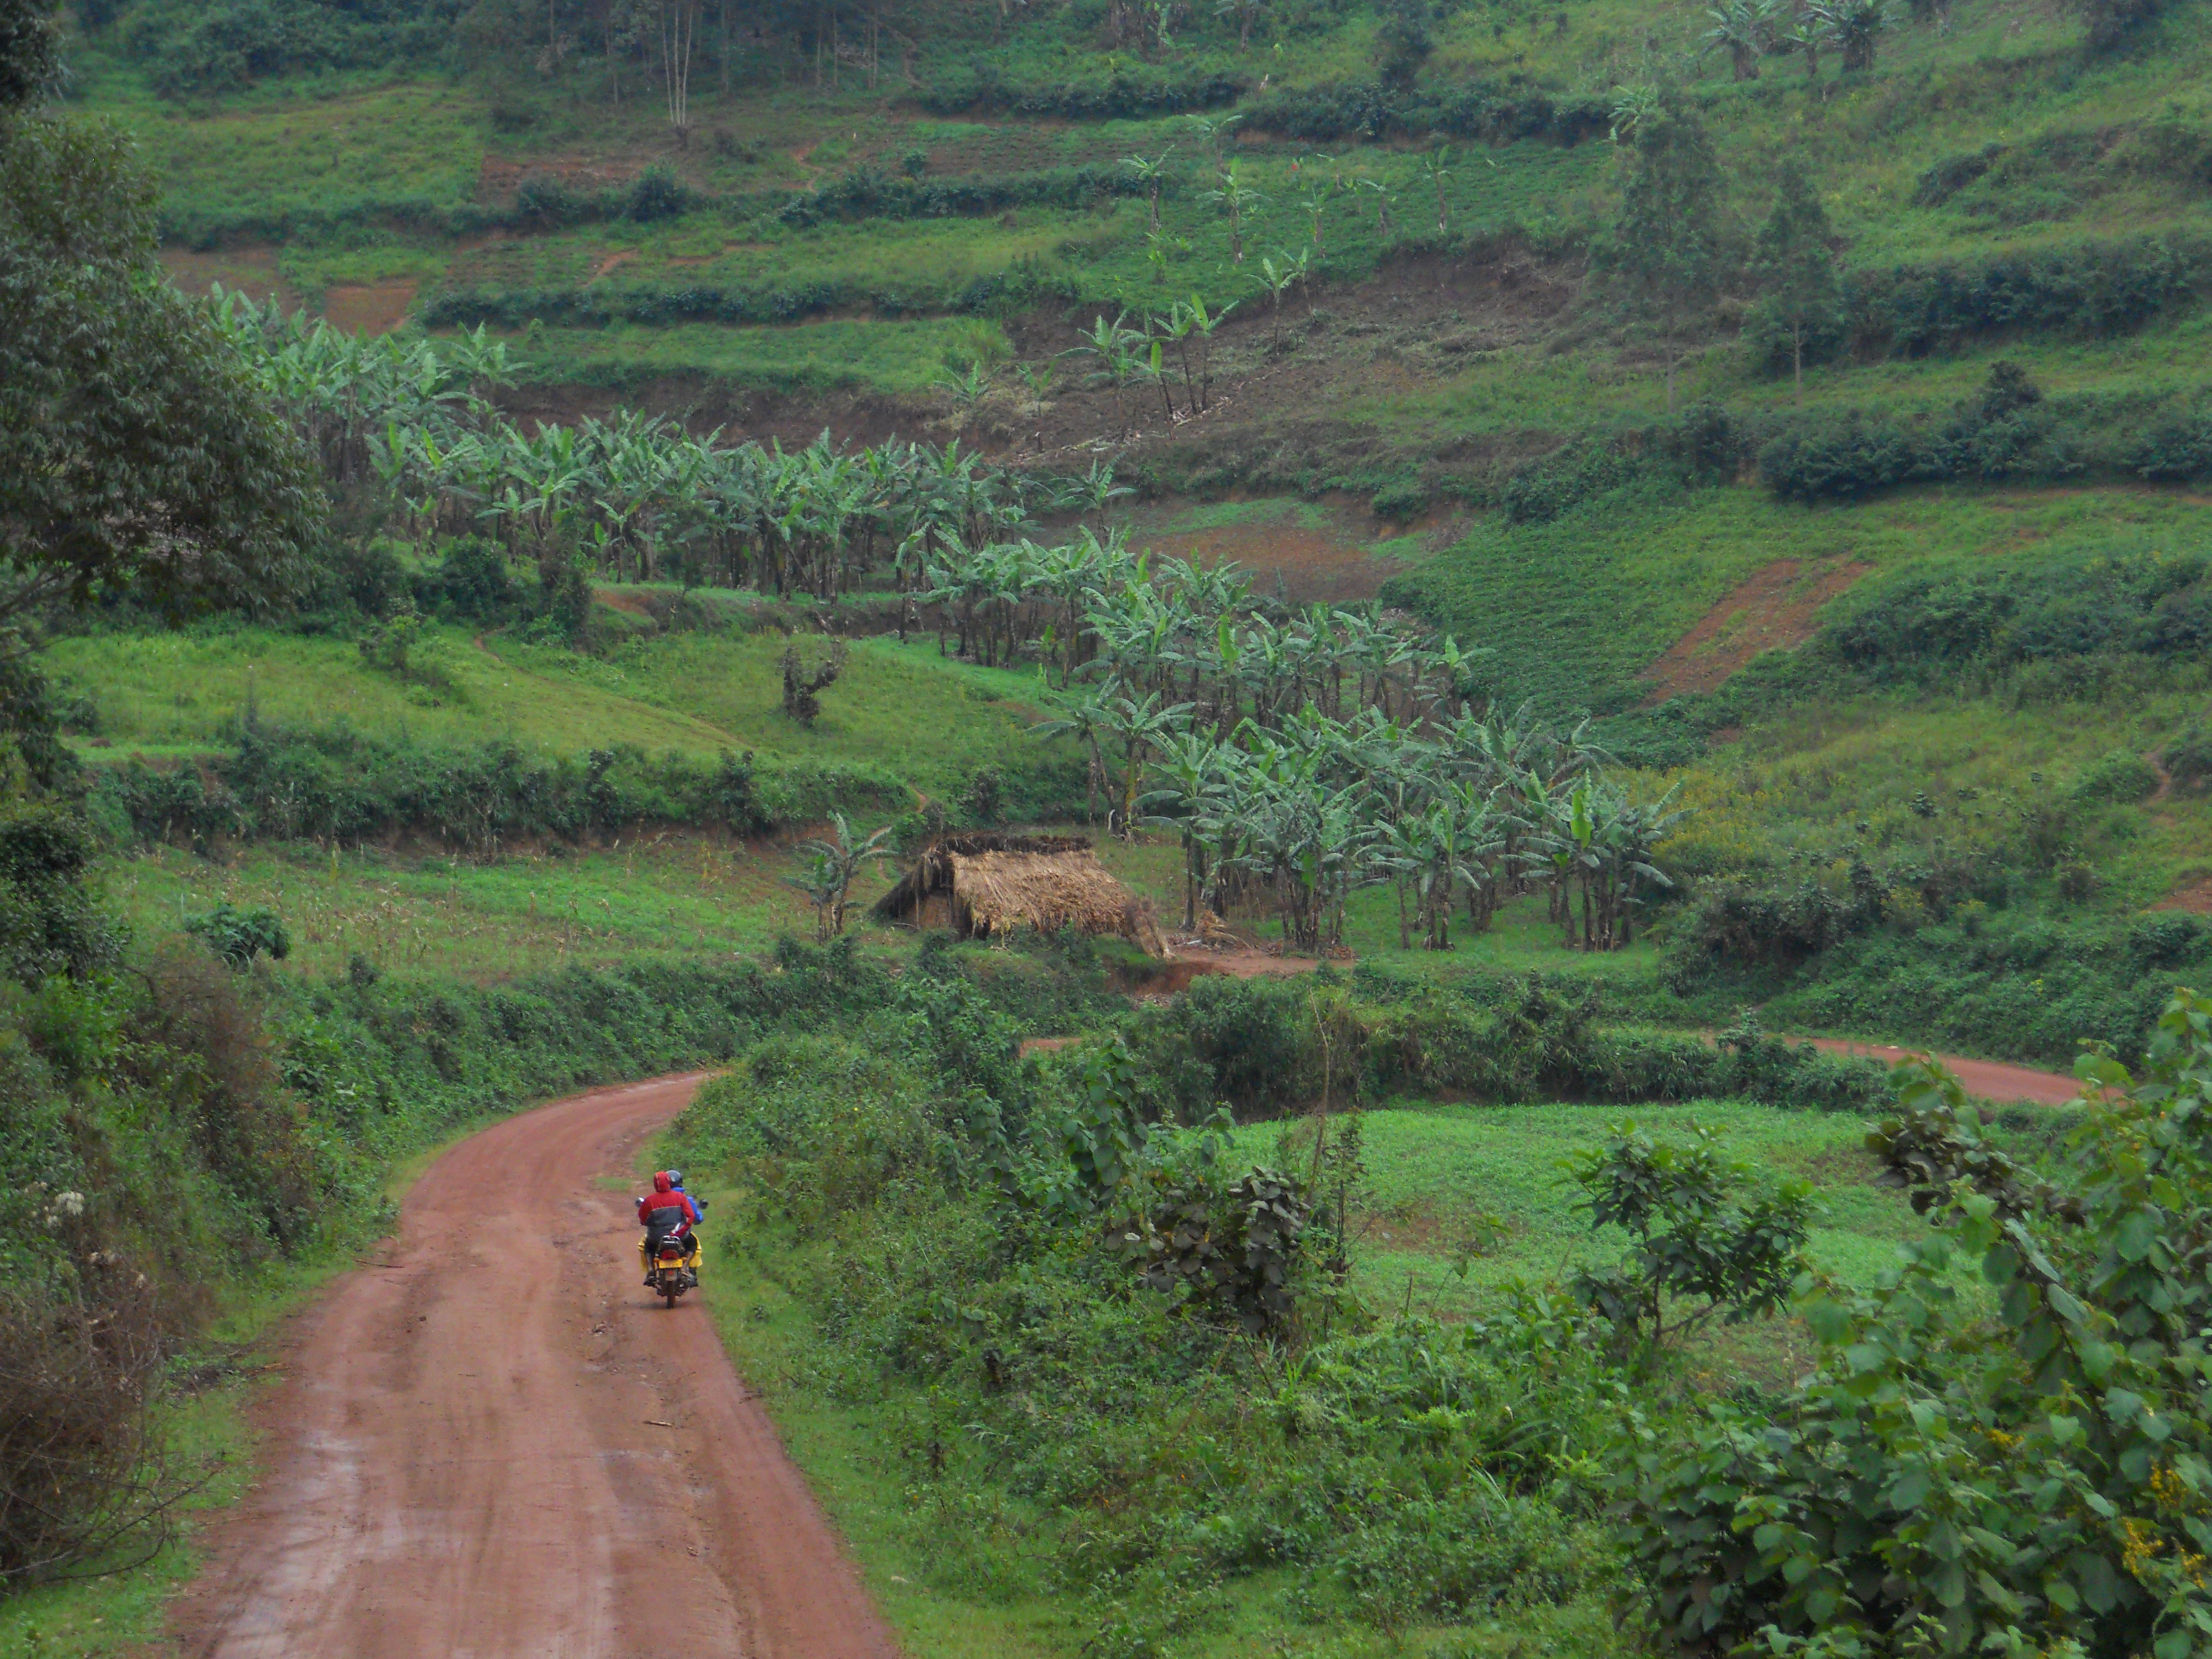 Road to the home of Gorillas